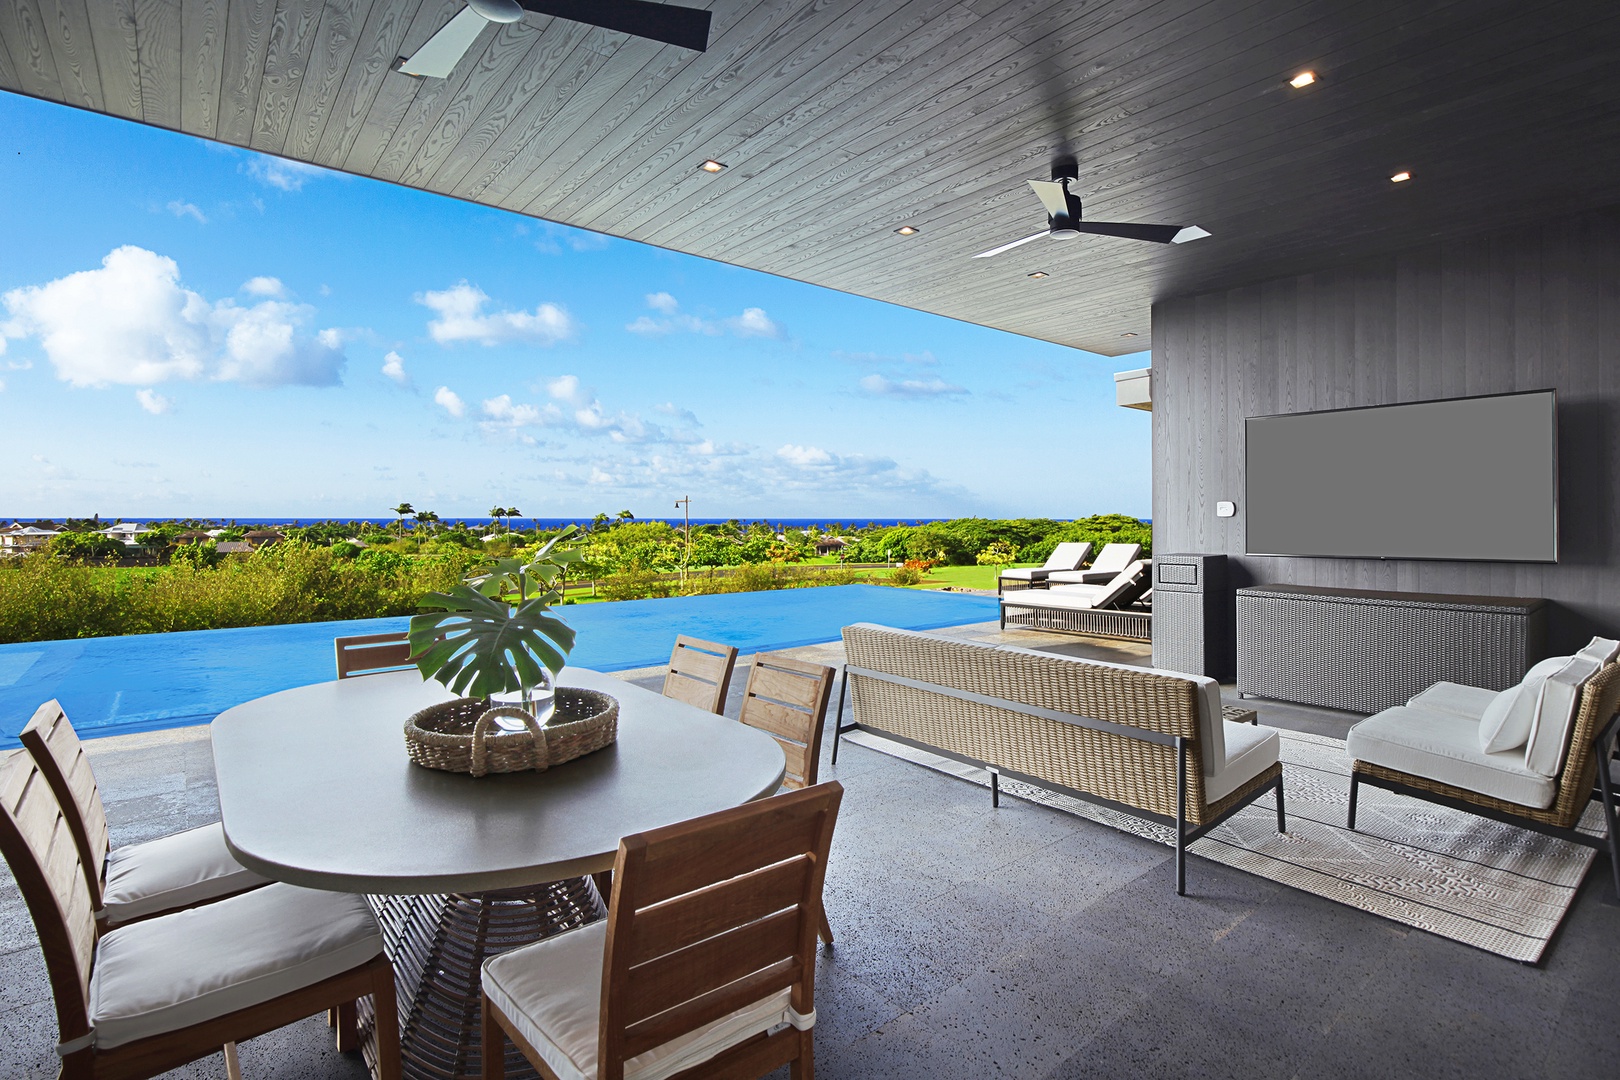 Koloa Vacation Rentals, Hale Mahina Hou - Unbeatable serenity at your home away from home: the perfect blend of the infinity pool, ocean, and sky in one frame.